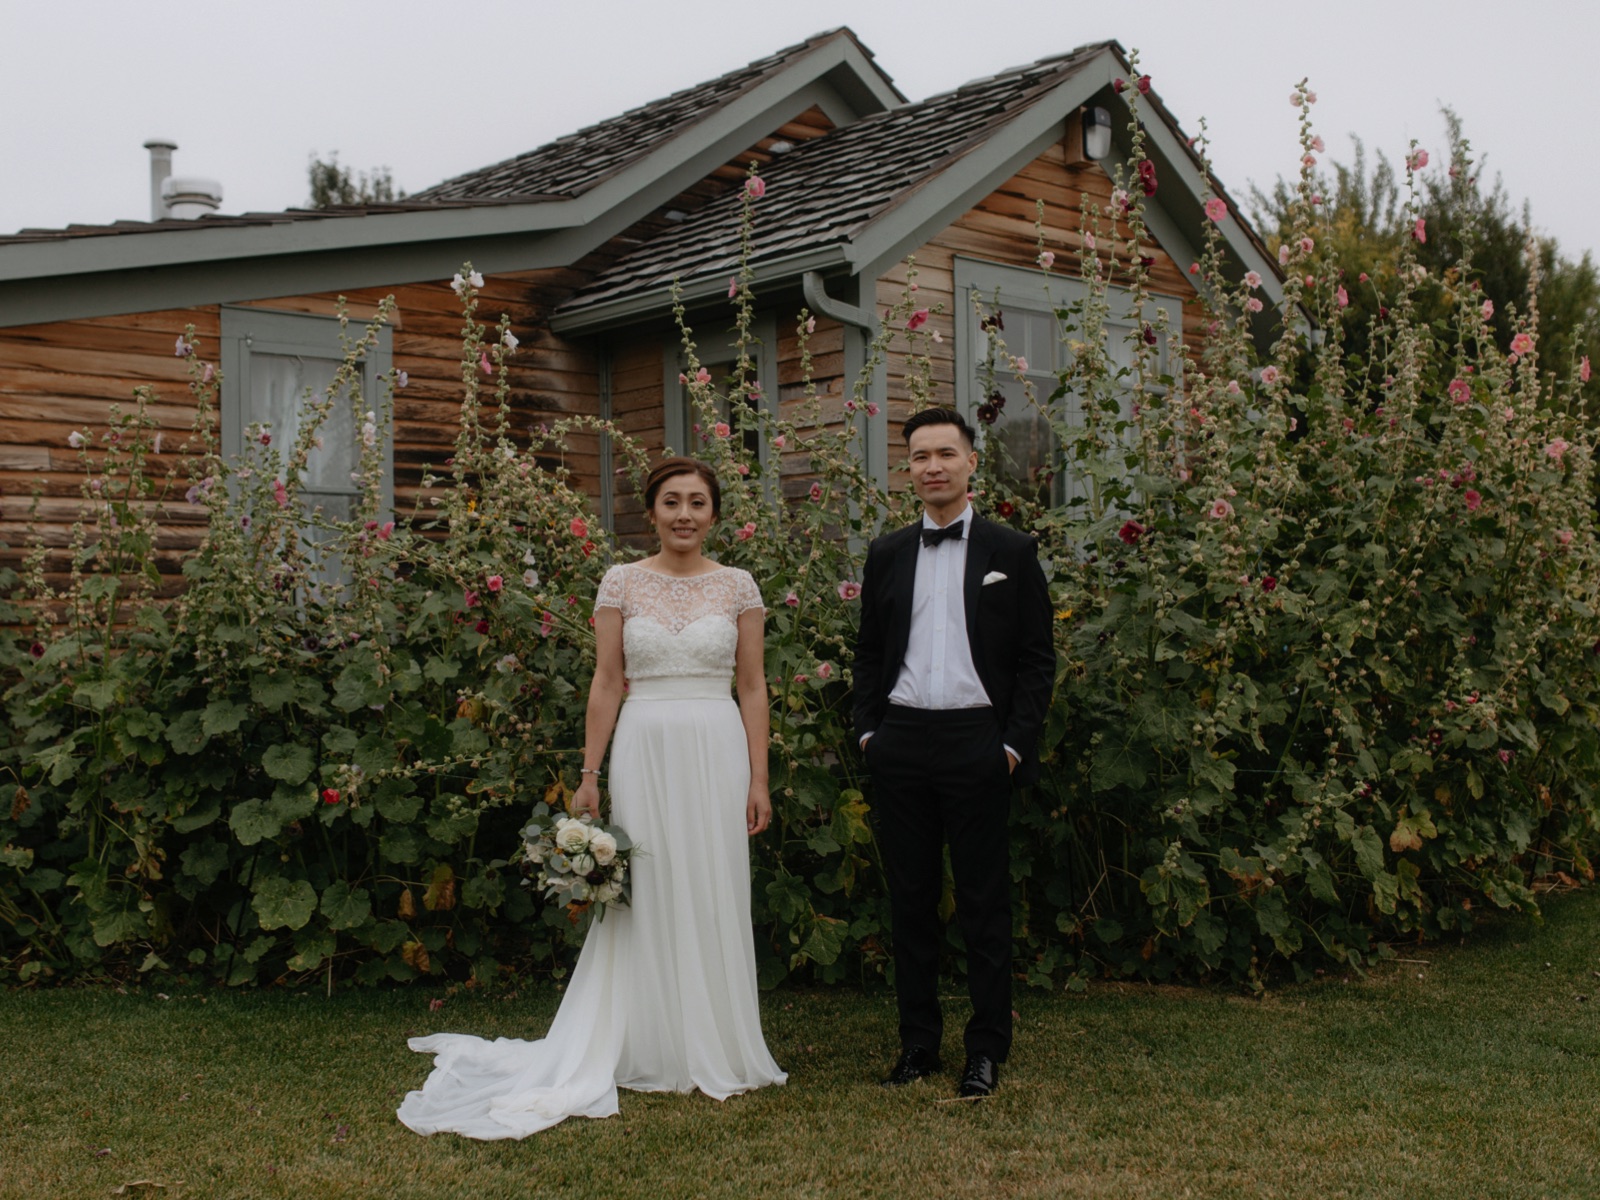 Wedding portraits around the Coutts Centre grounds in Nanton